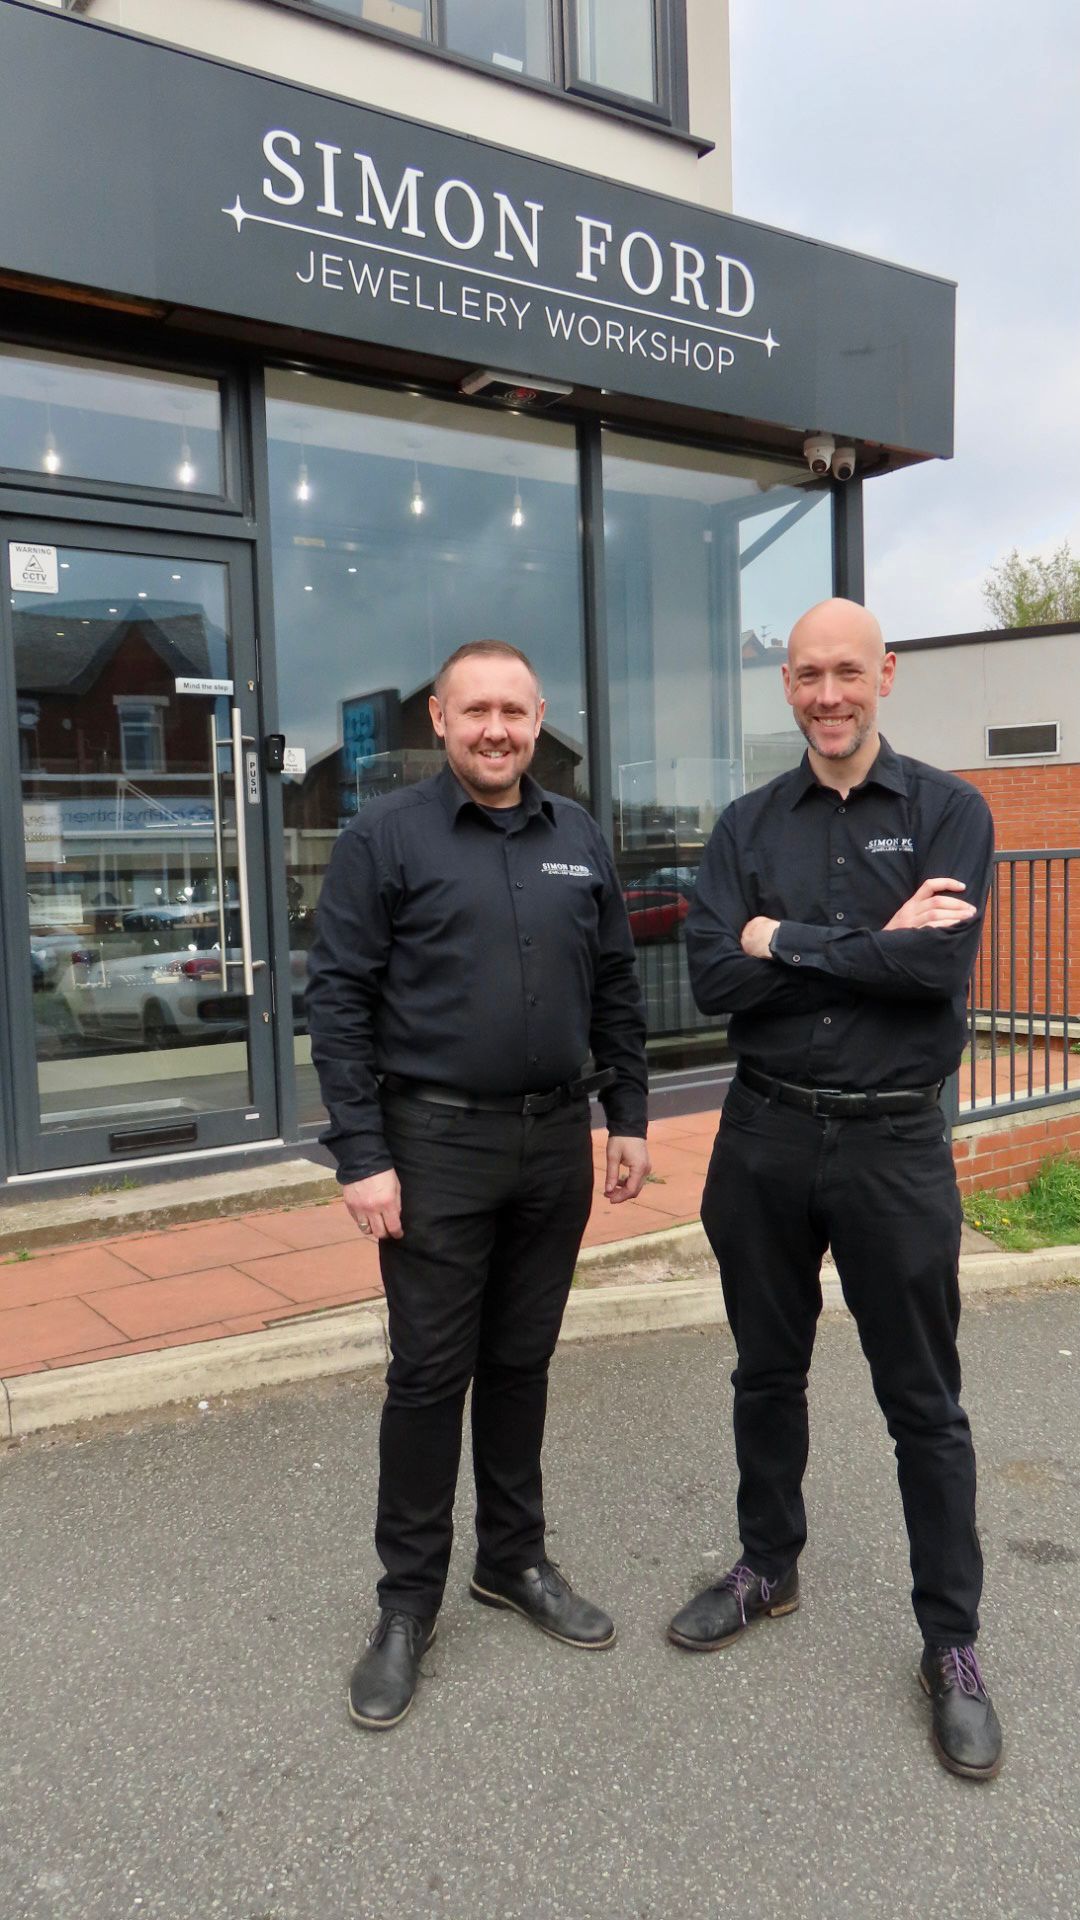 Simon Ford Jewellery Workshop is a new independent, dual family-run business at 144a Cambridge Road, Churchtown, Southport. Simon and Anthony are the two onsite goldsmiths. Photo by Andrew Brown Stand Up For Southport